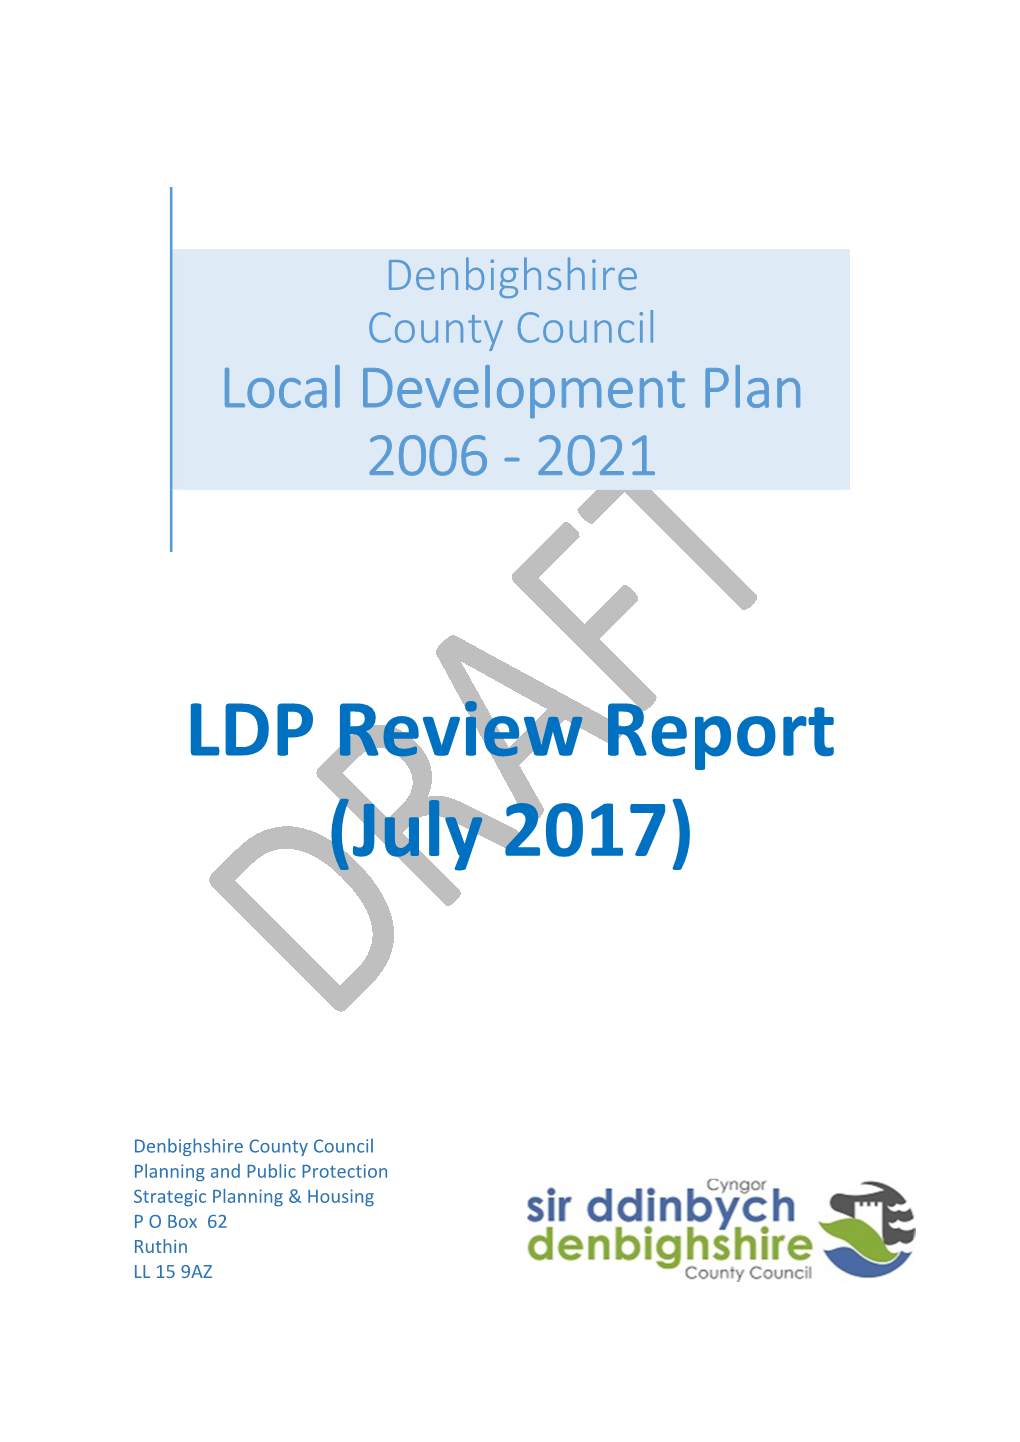 LDP Review Report (July 2017)